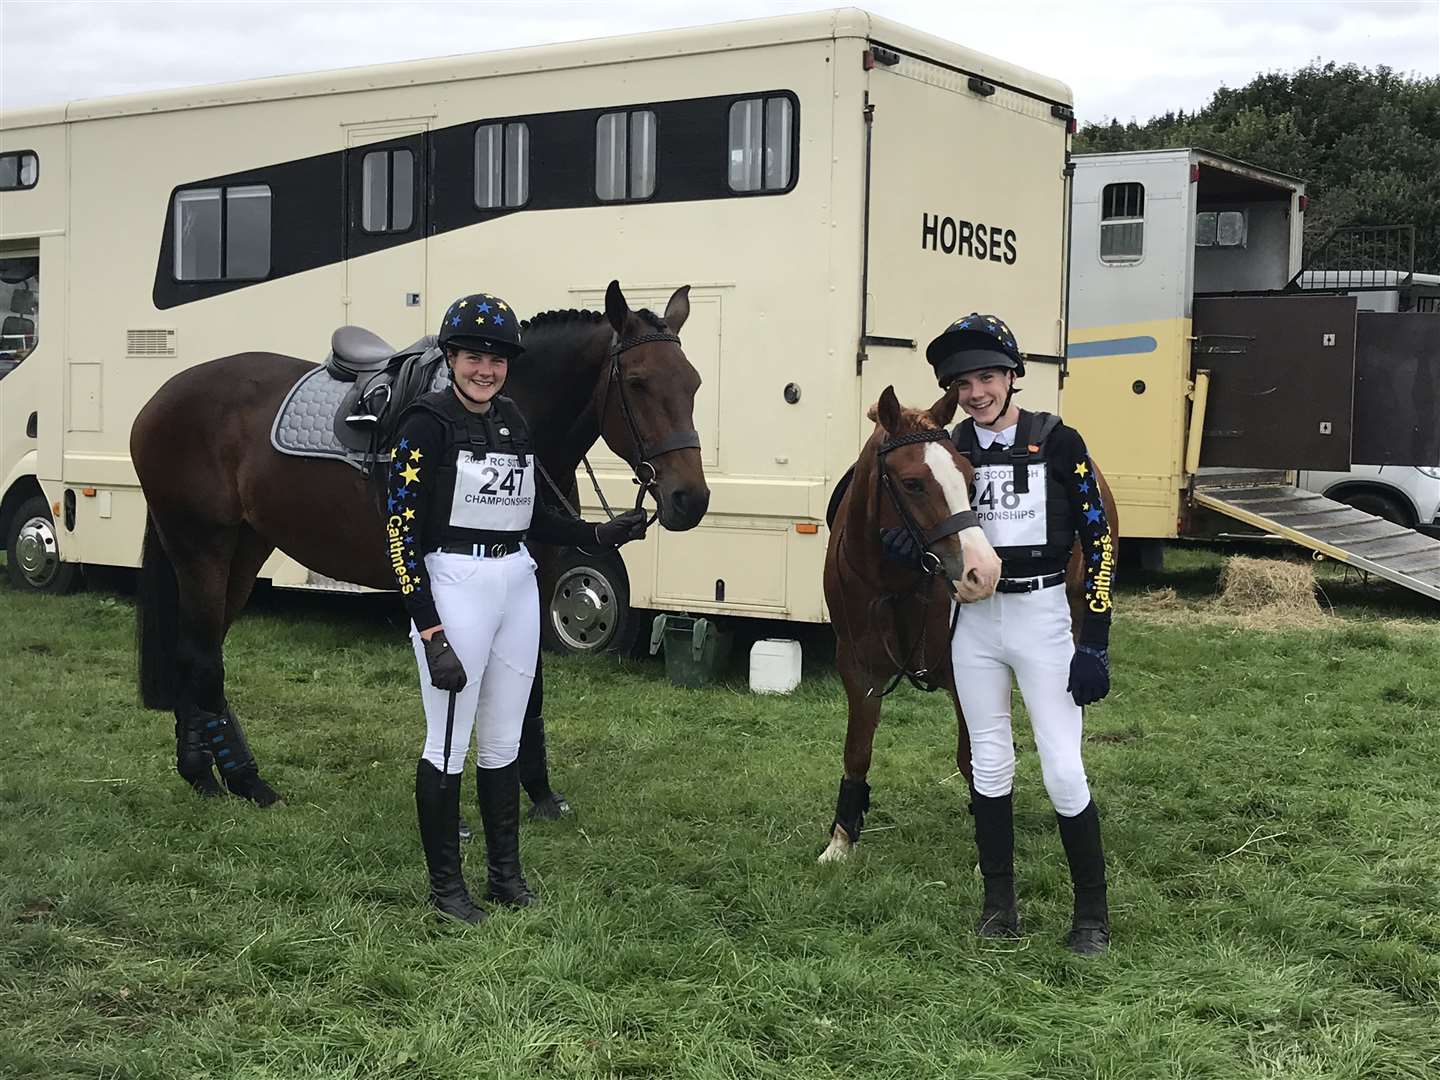 Keeping it in the family. Morven and Liam Mackenzie looking smart in the Caithness Riding Club cross country colours.